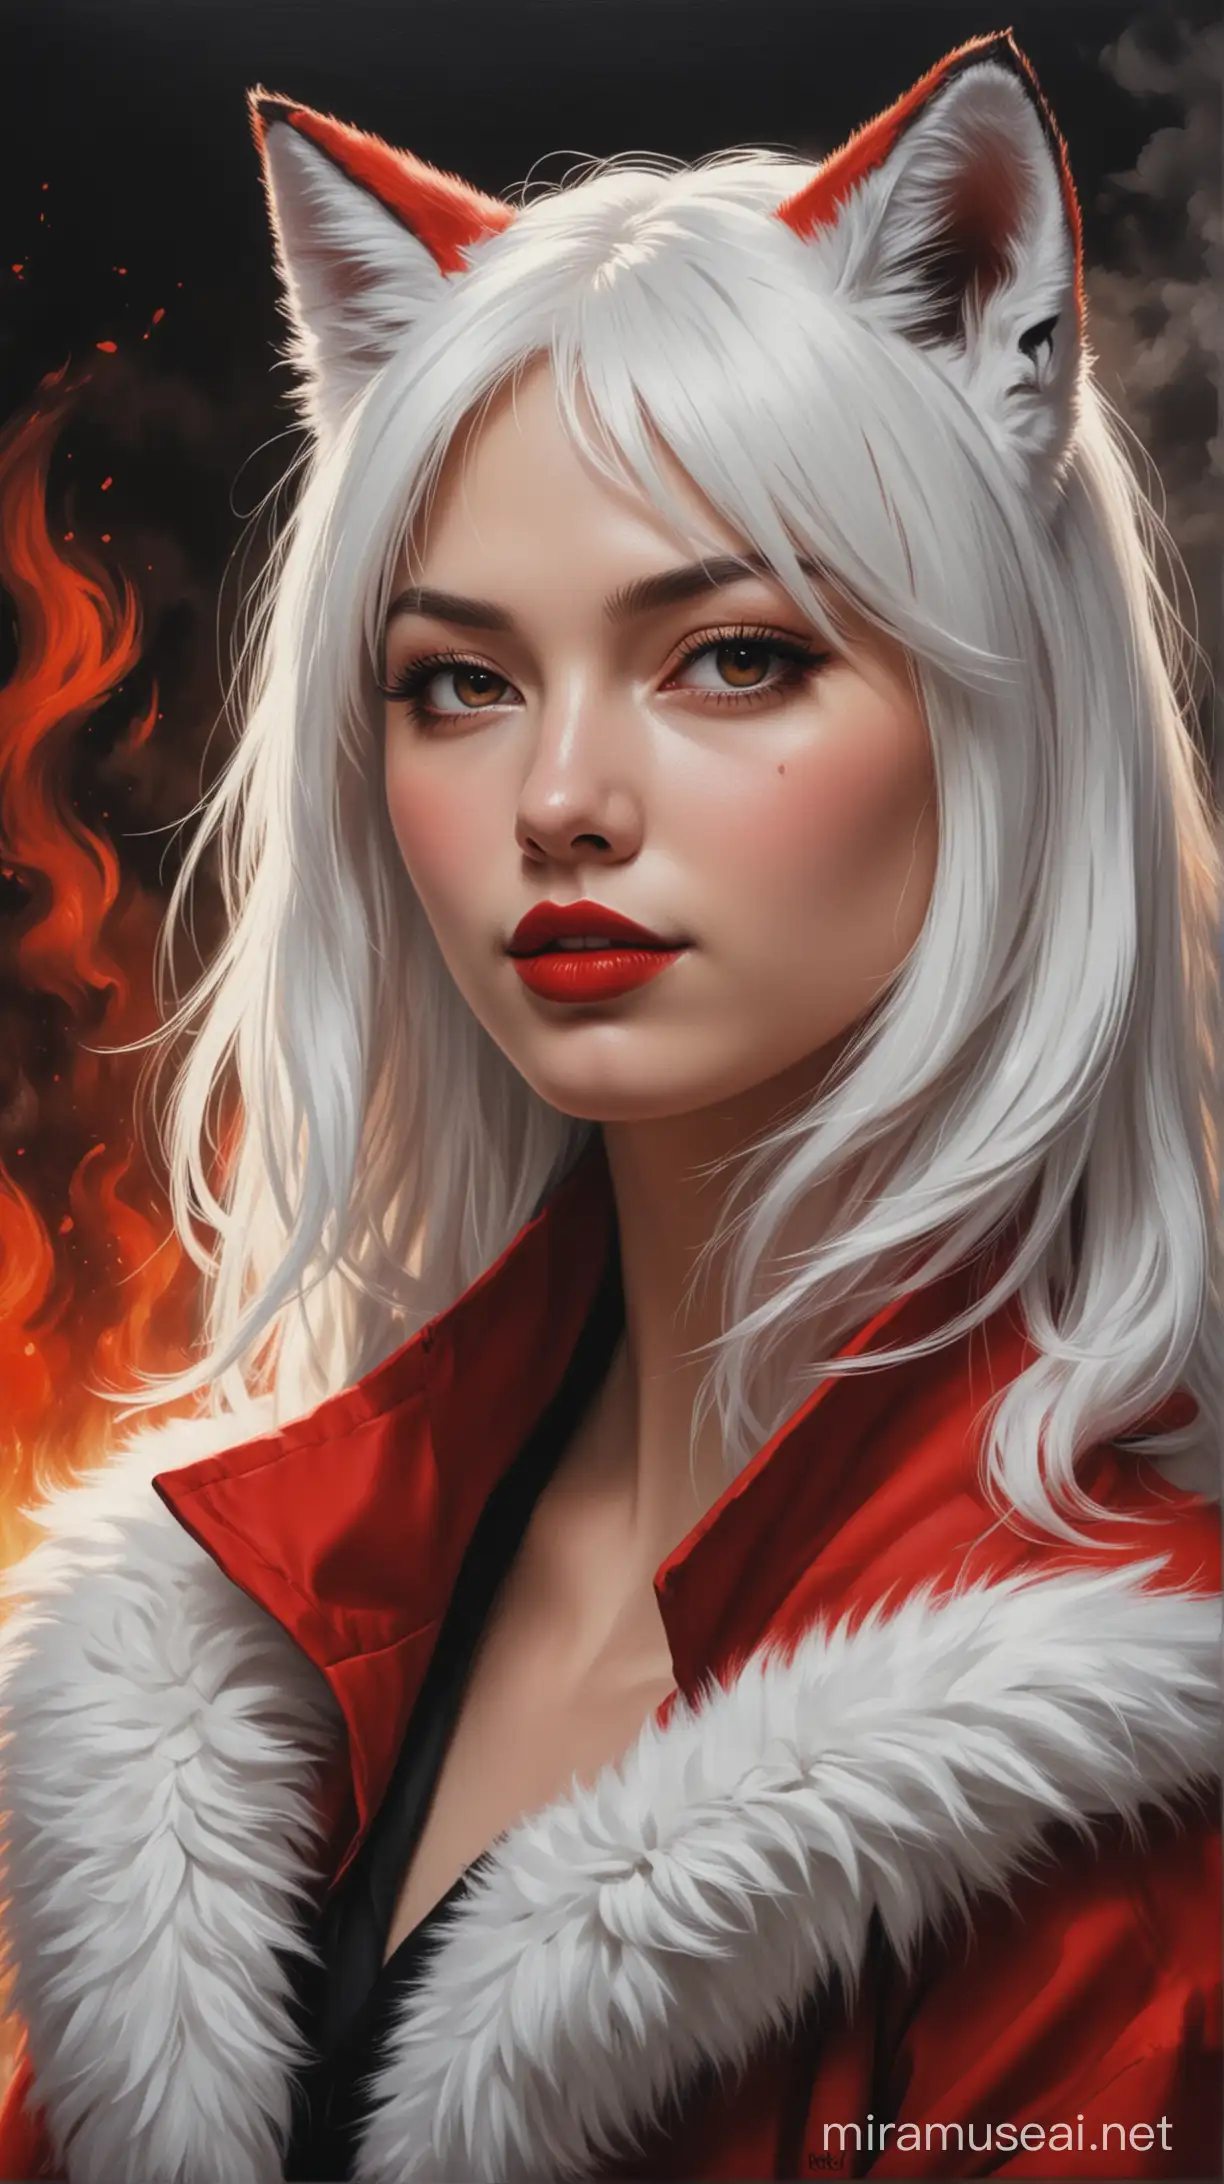 Woman with Cat Ears and Red Lipstick in Red Coat Oil Painting